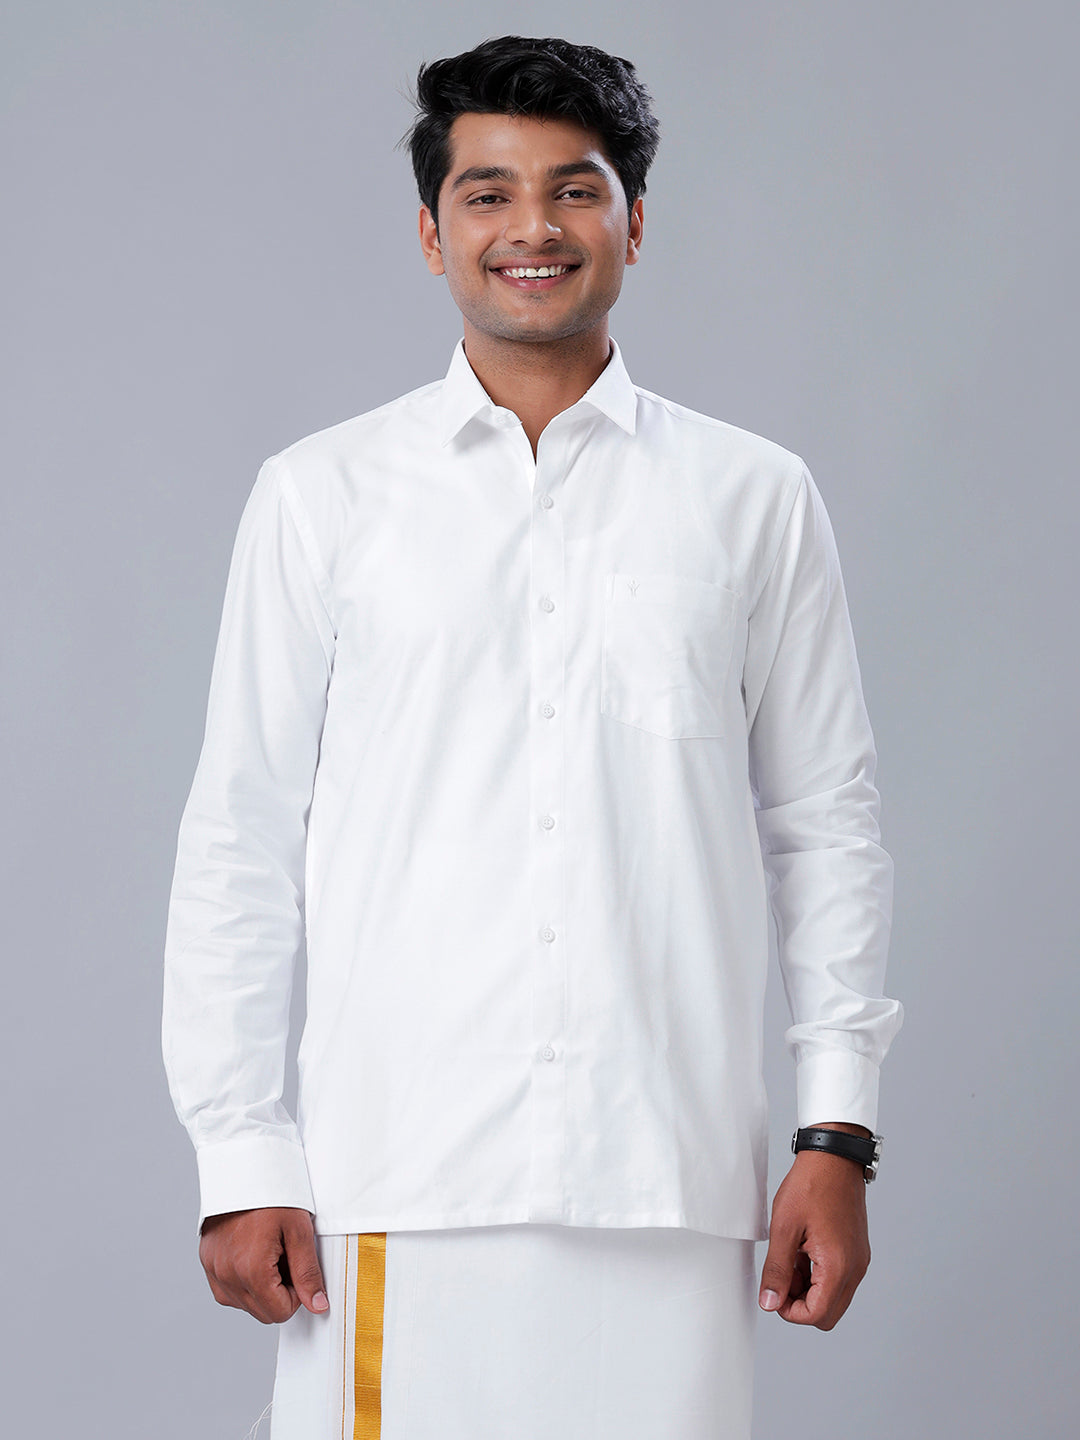 Mens Premium Pure Cotton White Shirt Full Sleeves Limited Edition 1